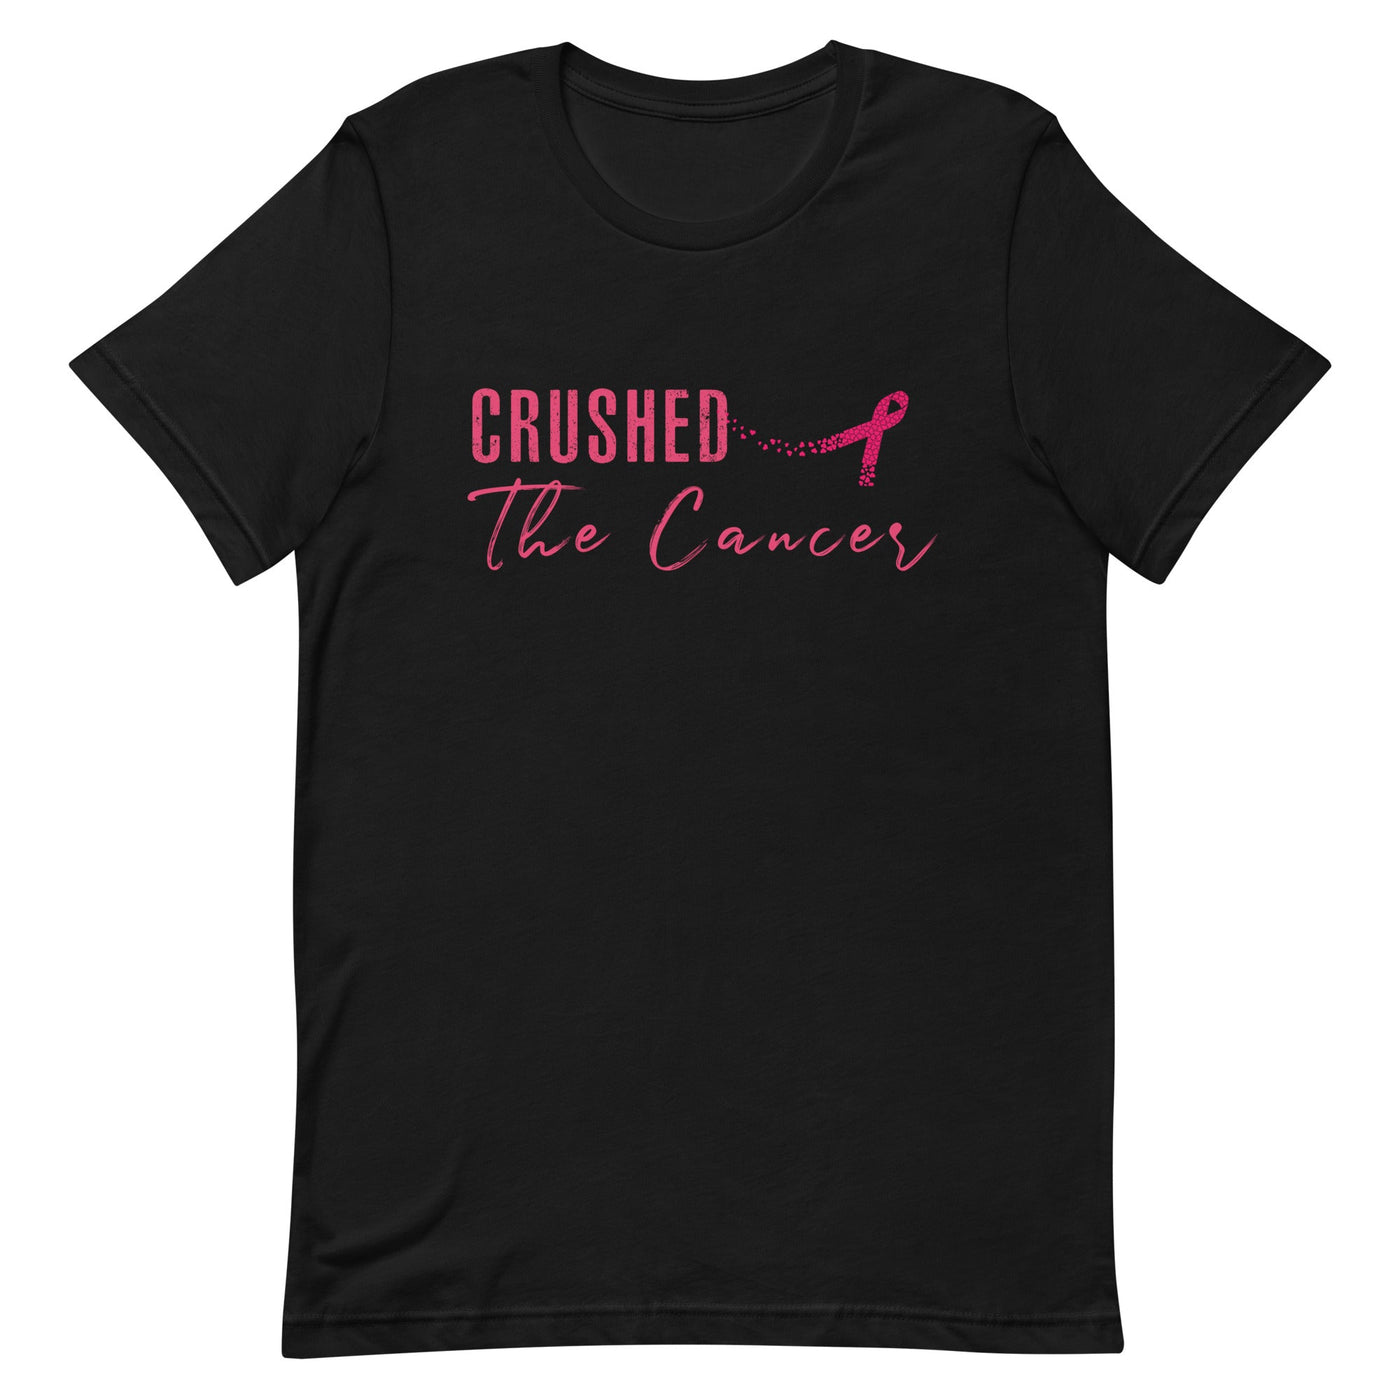 CRUSHED THE CANCER WOMEN'S T-SHIRT- PINK FONT Black S 